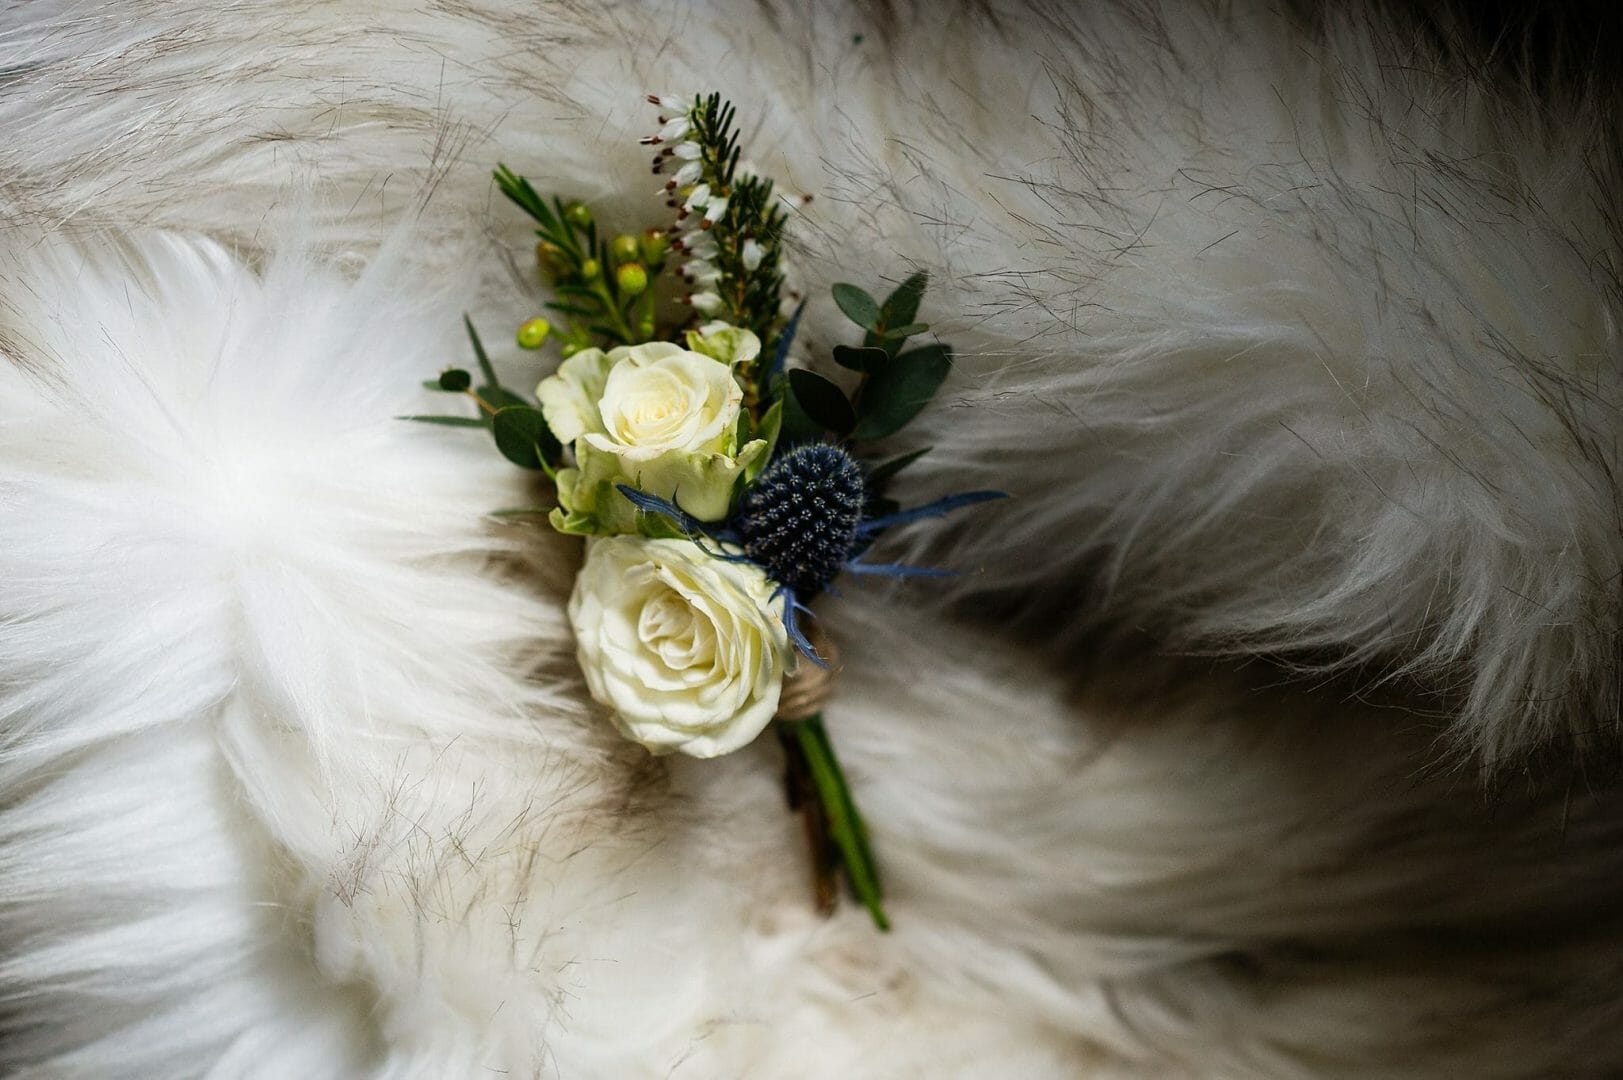 Rose and Thistles for a wonderful wedding buttonhole